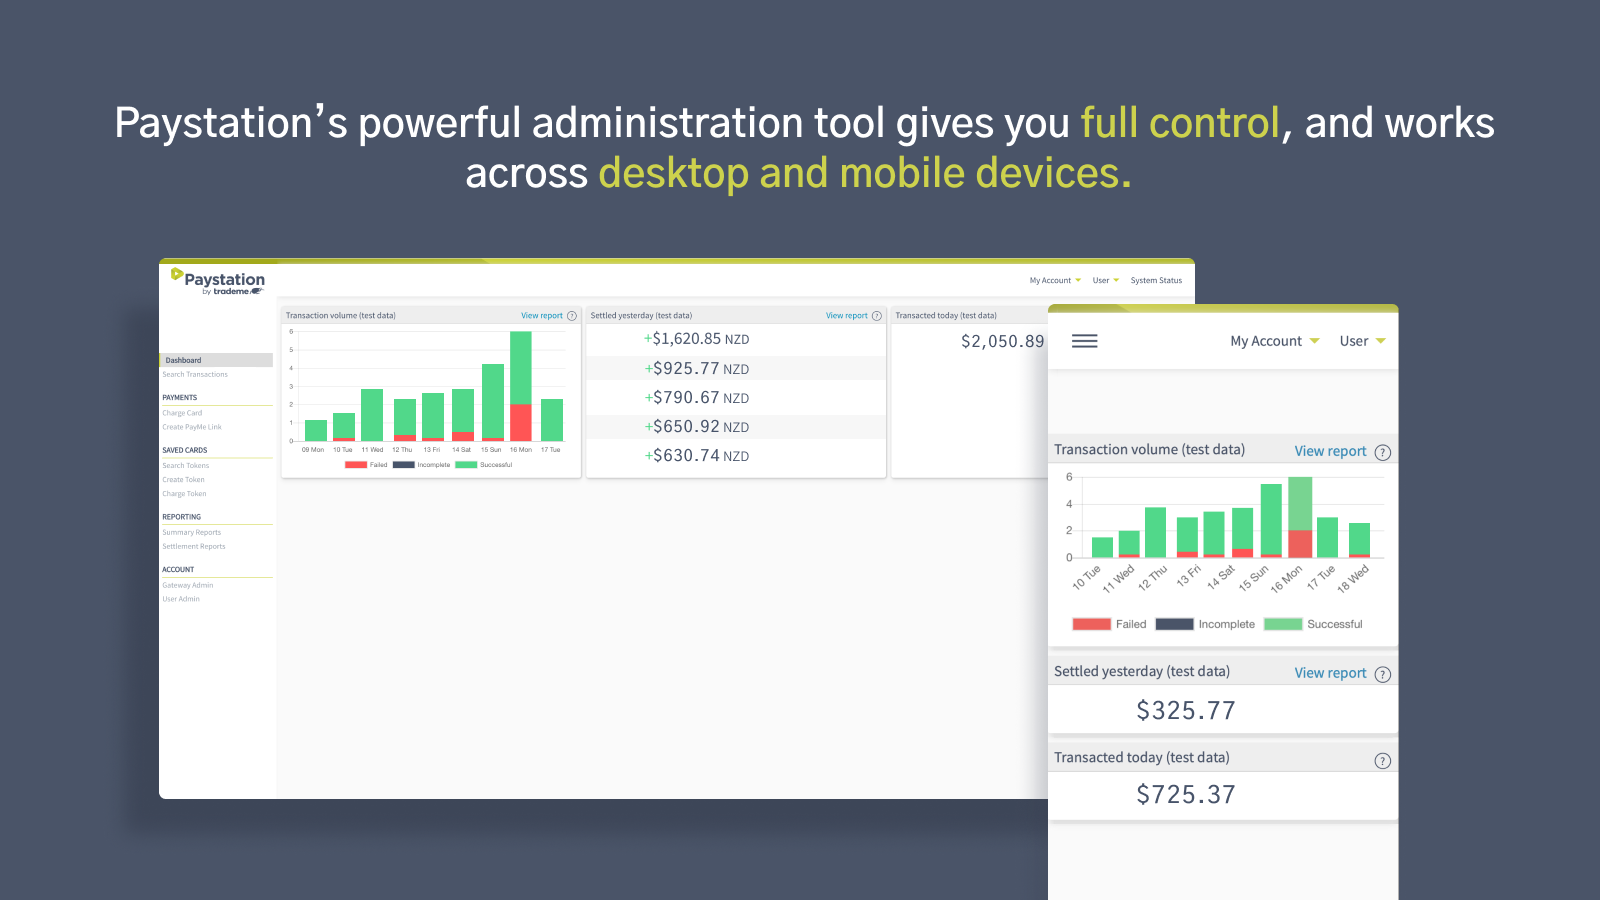 Manage on the go with Paystation's powerful administration tool.